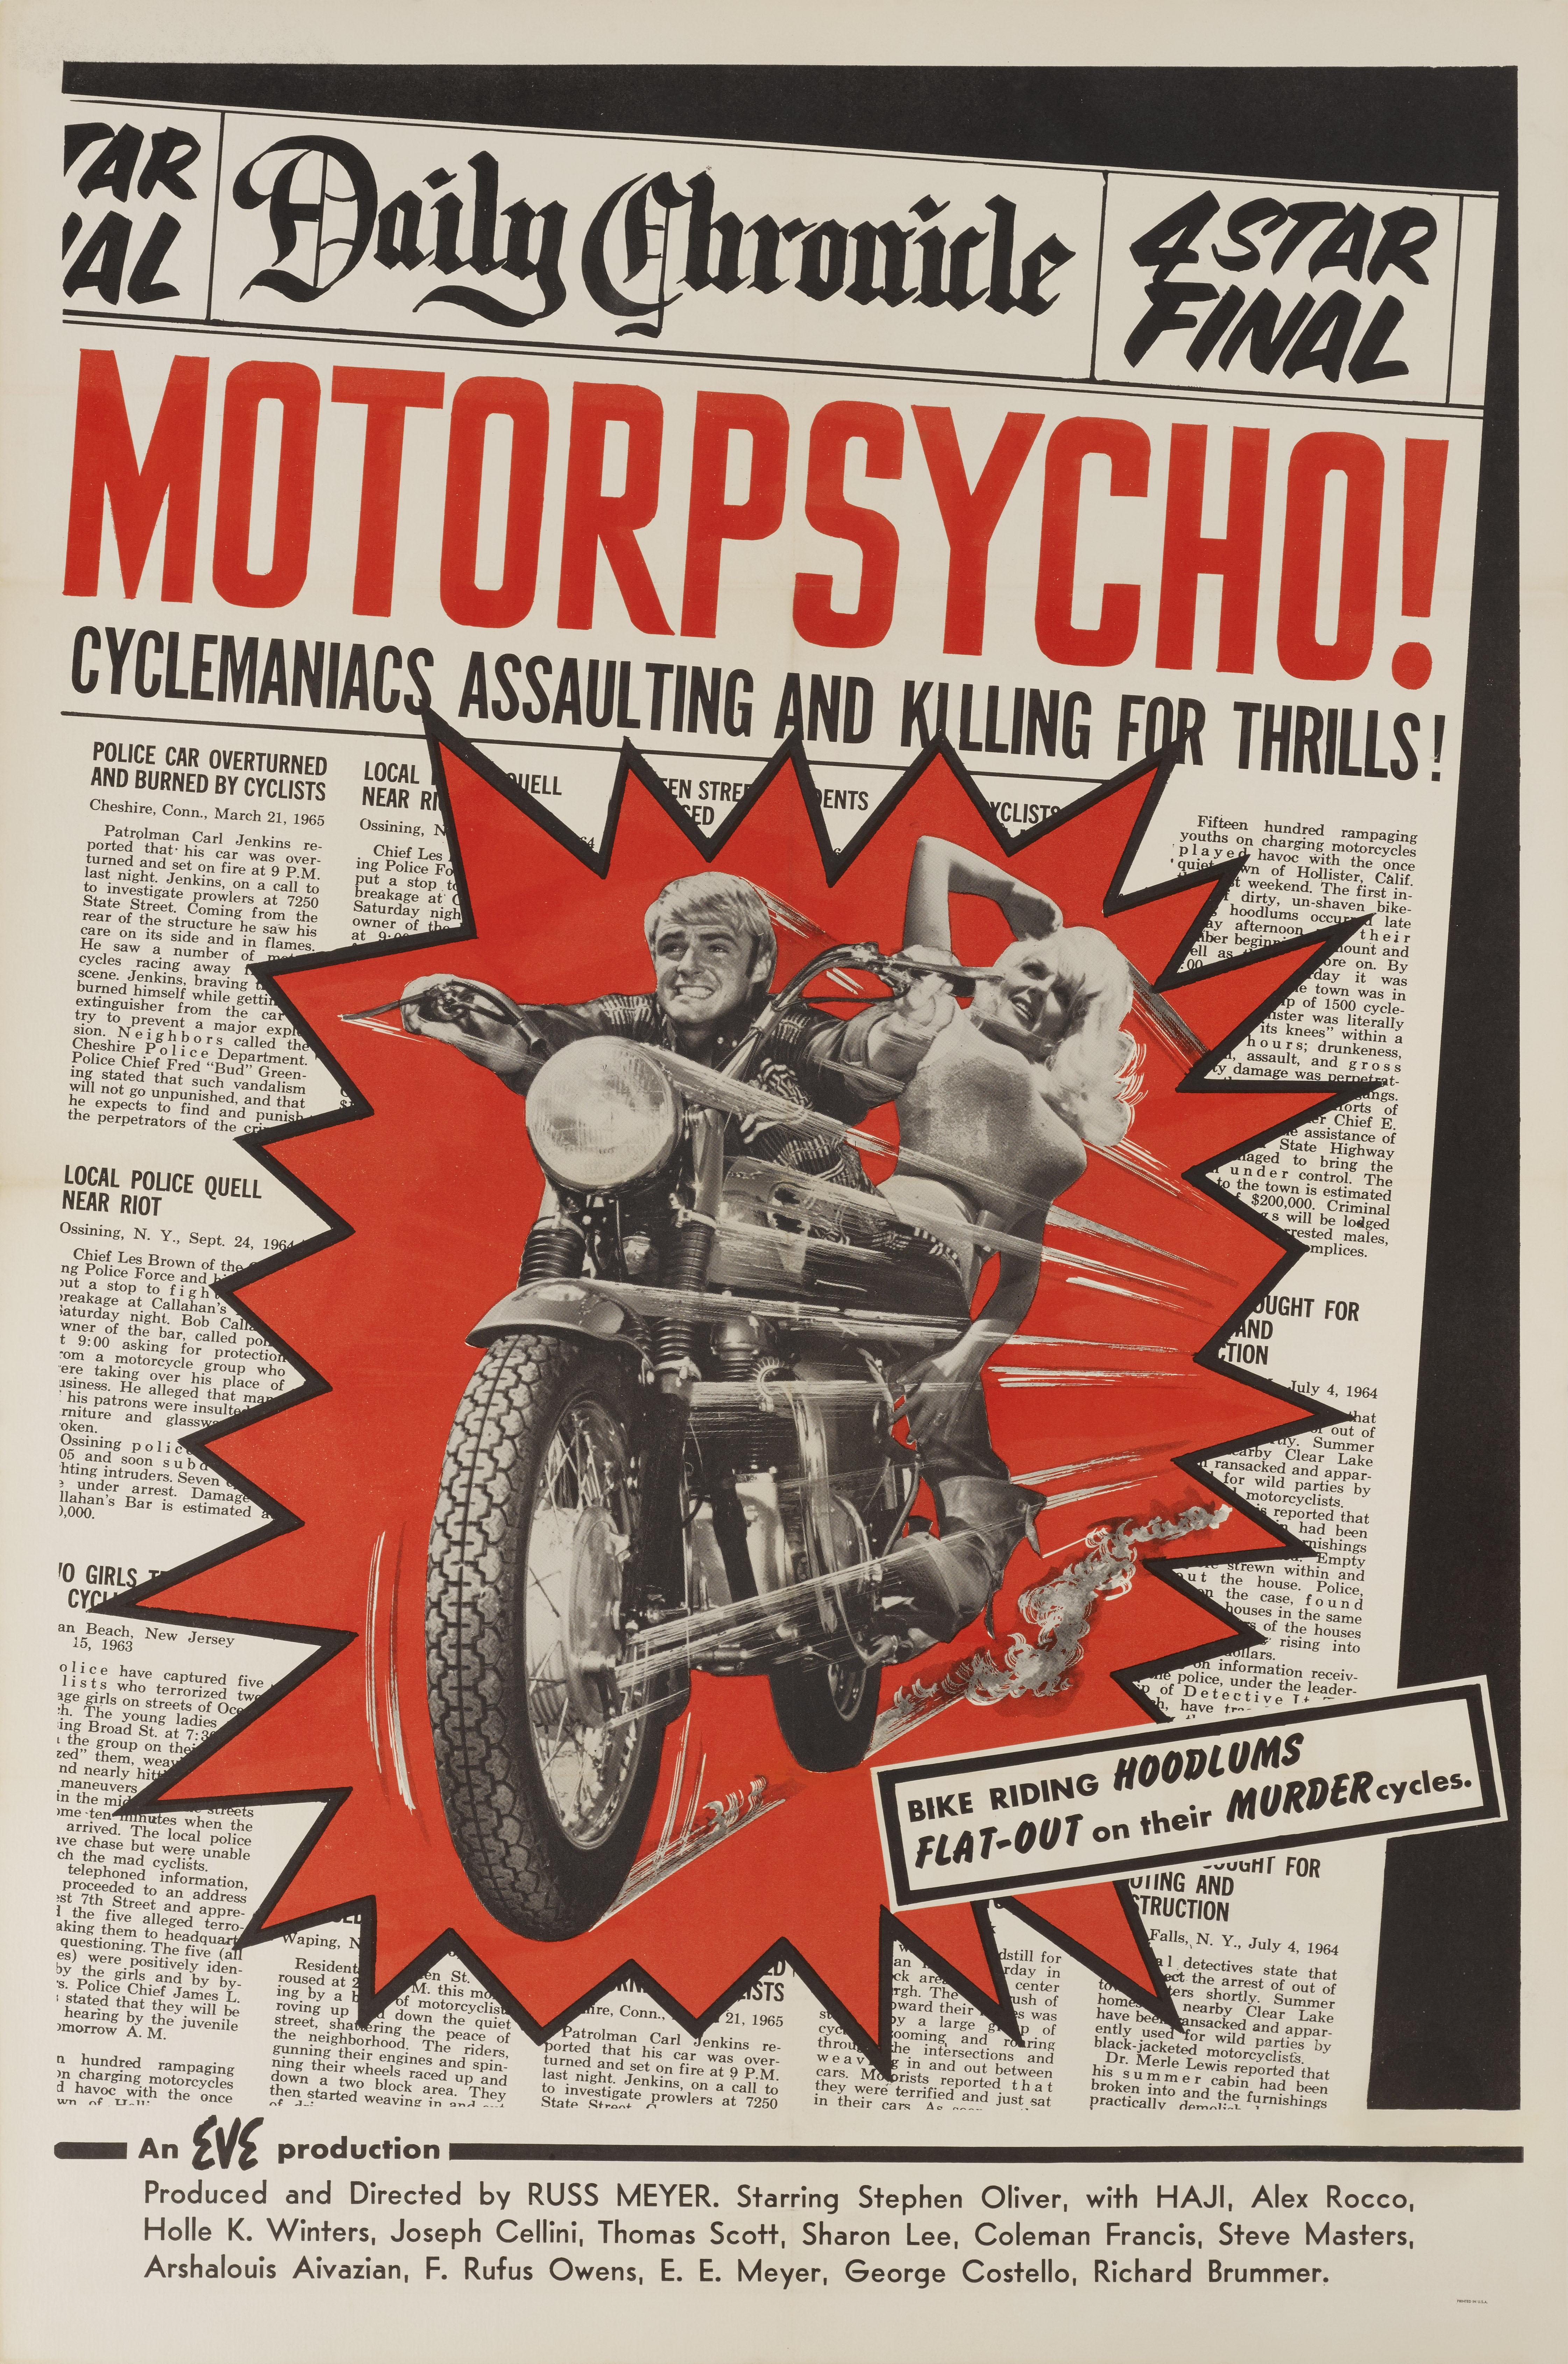 Original US film poster for the 1965 Exploitation film.
This Russ Meyer film was released just before Meyer's more popular film, Faster, Pussycat! Kill! Kill! Another typical Meyer sexploitation film, it tells the story of a male motorcycle gang,